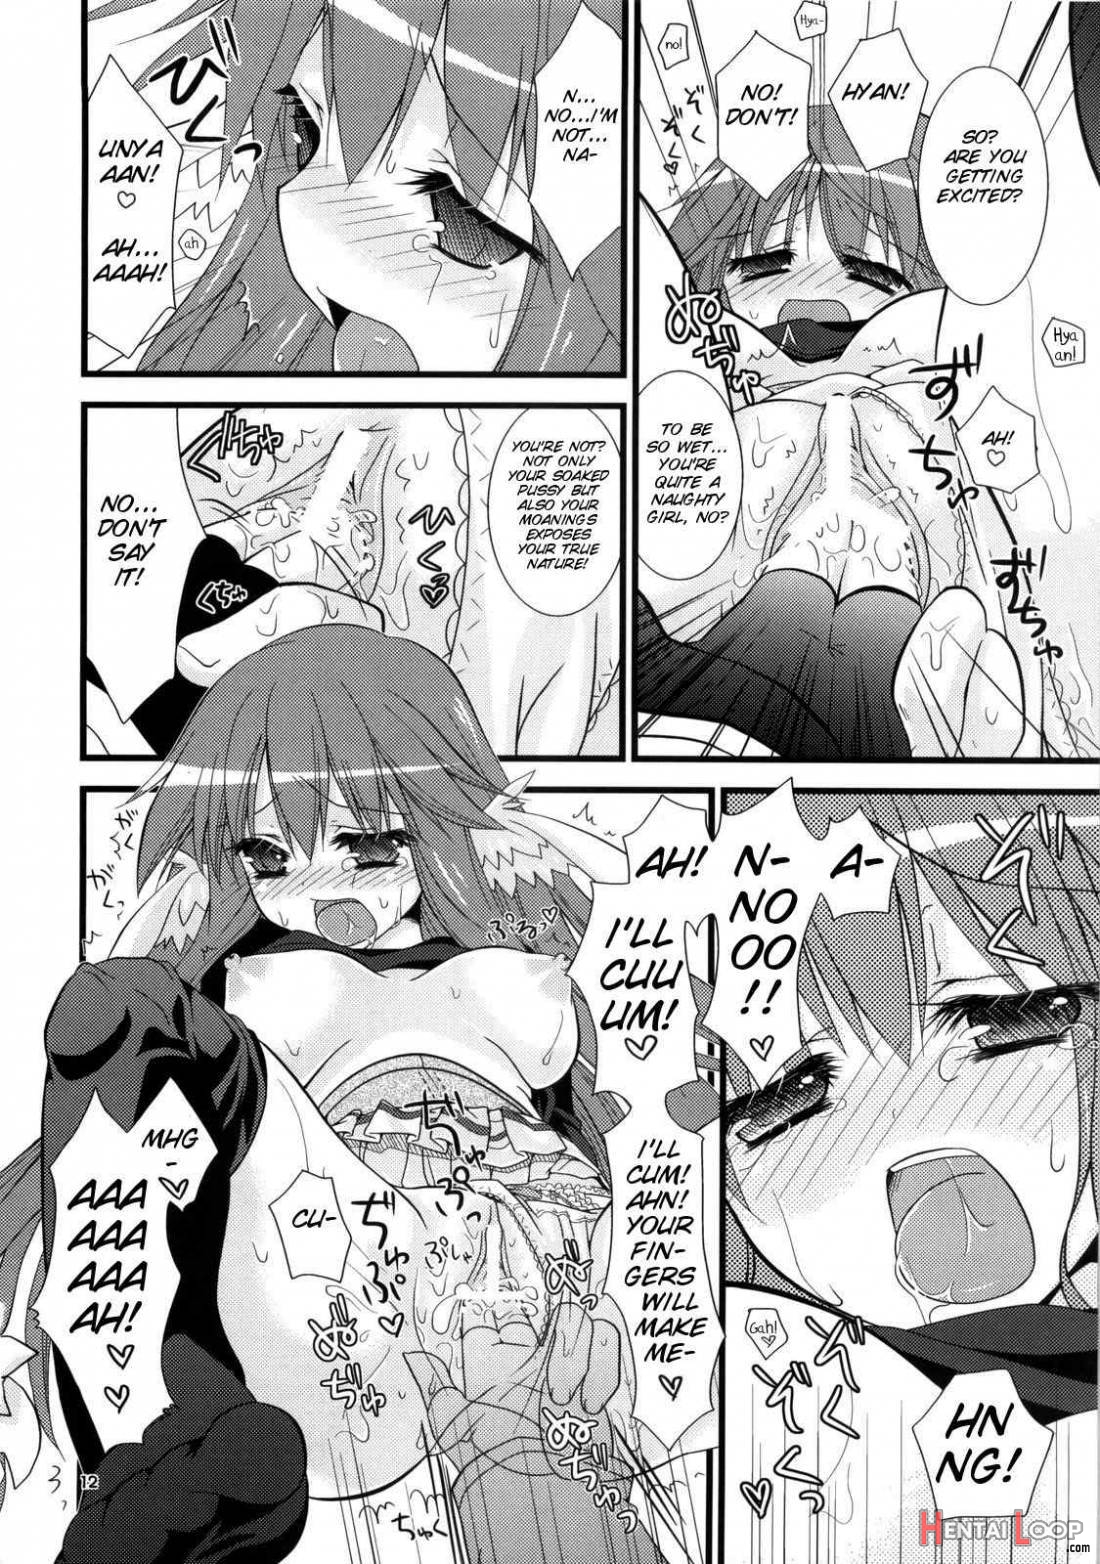 Daily RO page 10